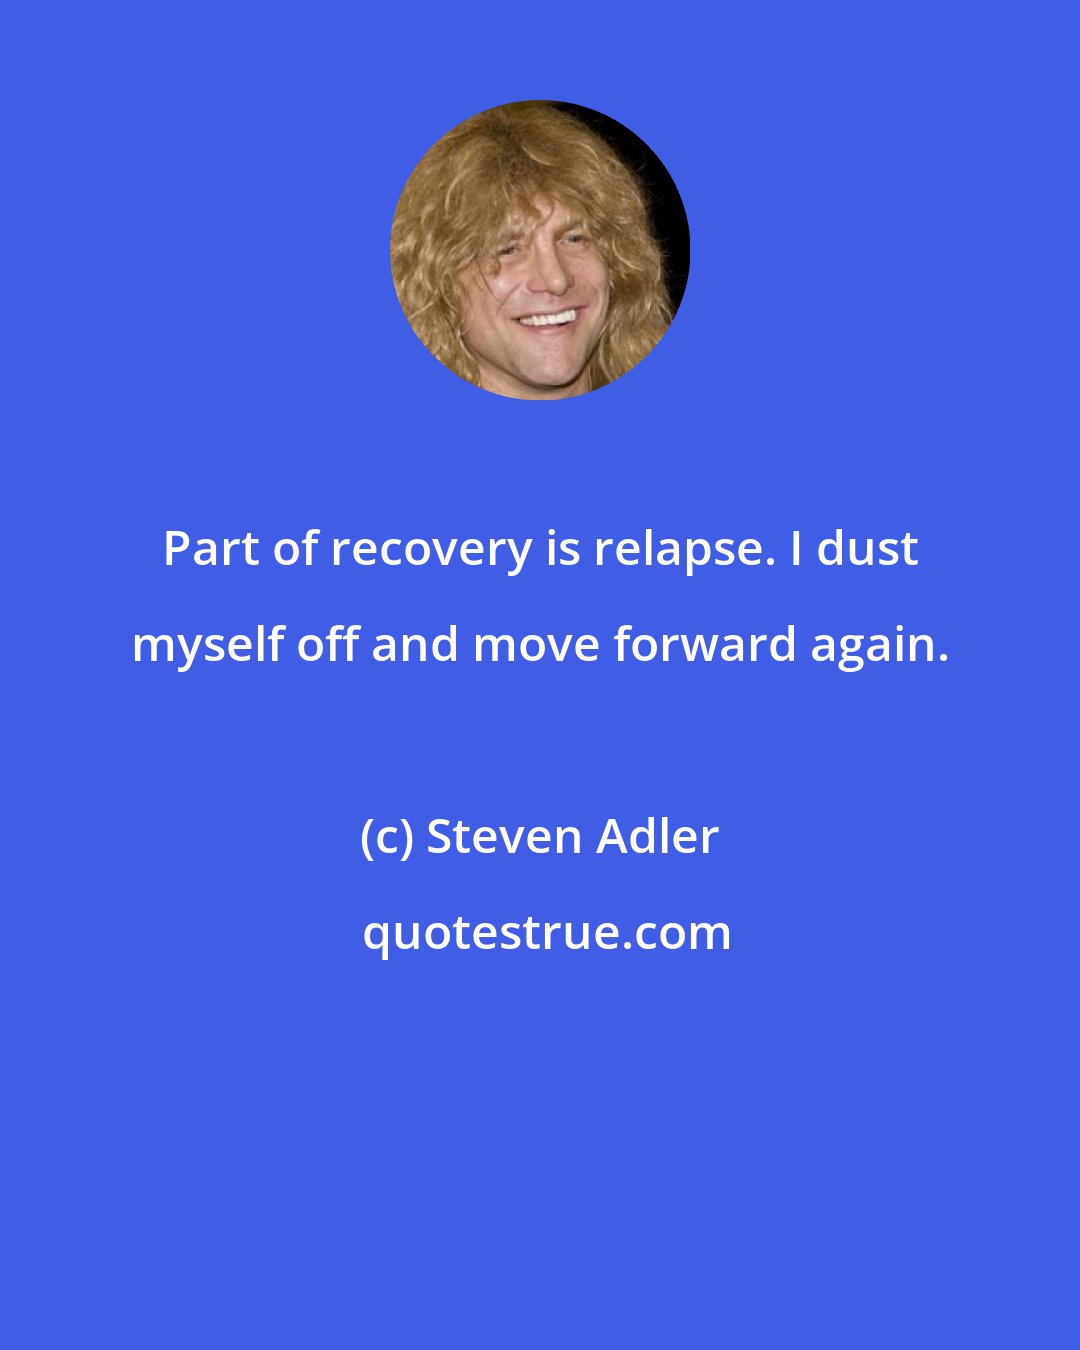 Steven Adler: Part of recovery is relapse. I dust myself off and move forward again.